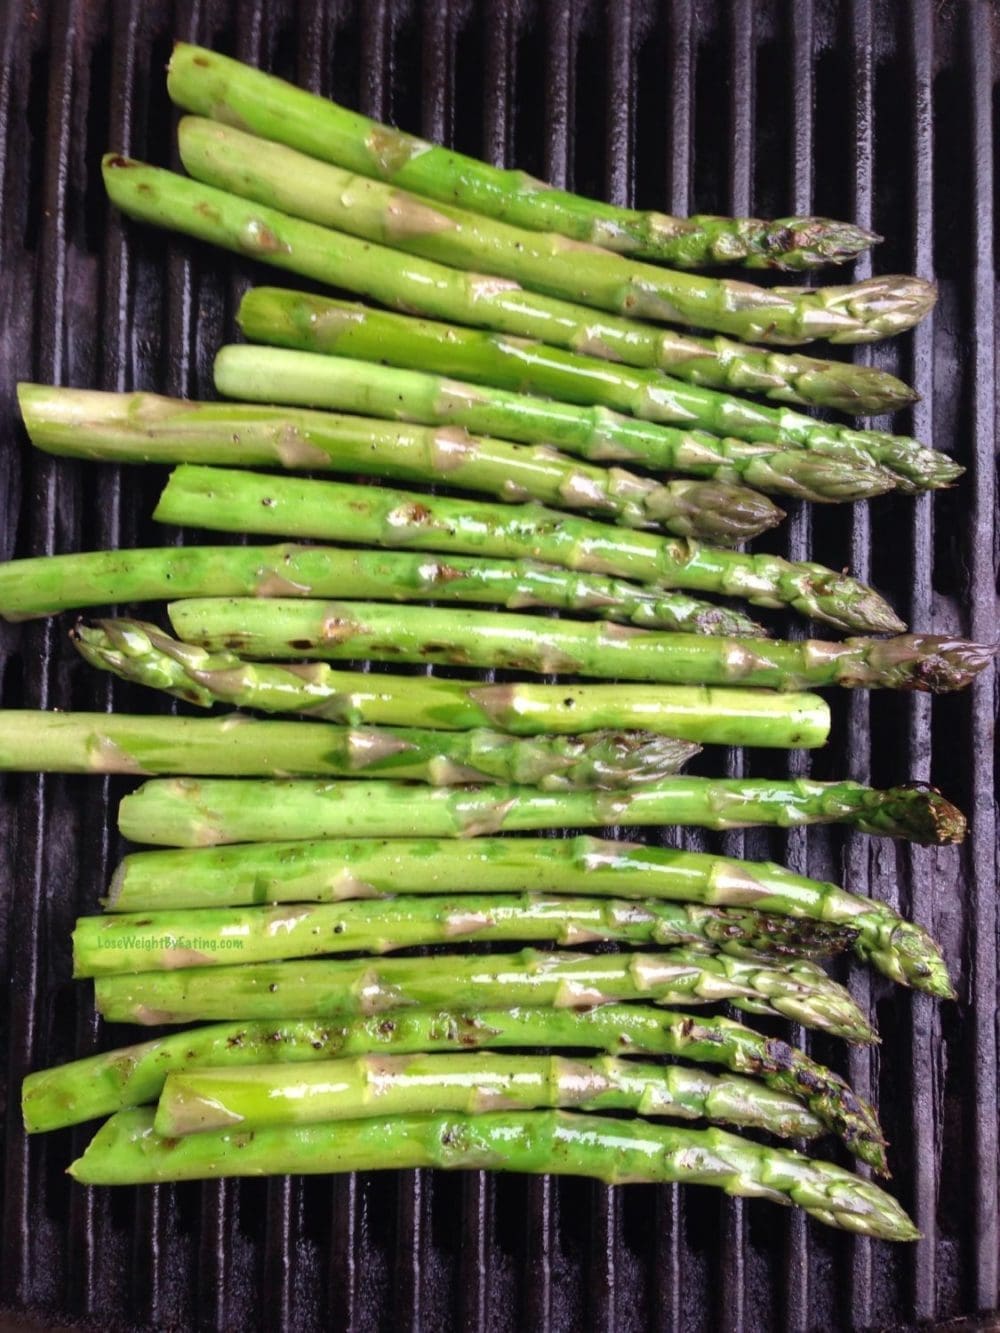 Perfect Asparagus on the Grill BBQ Asparagus Recipe - Healthy Sides for Pork Chops